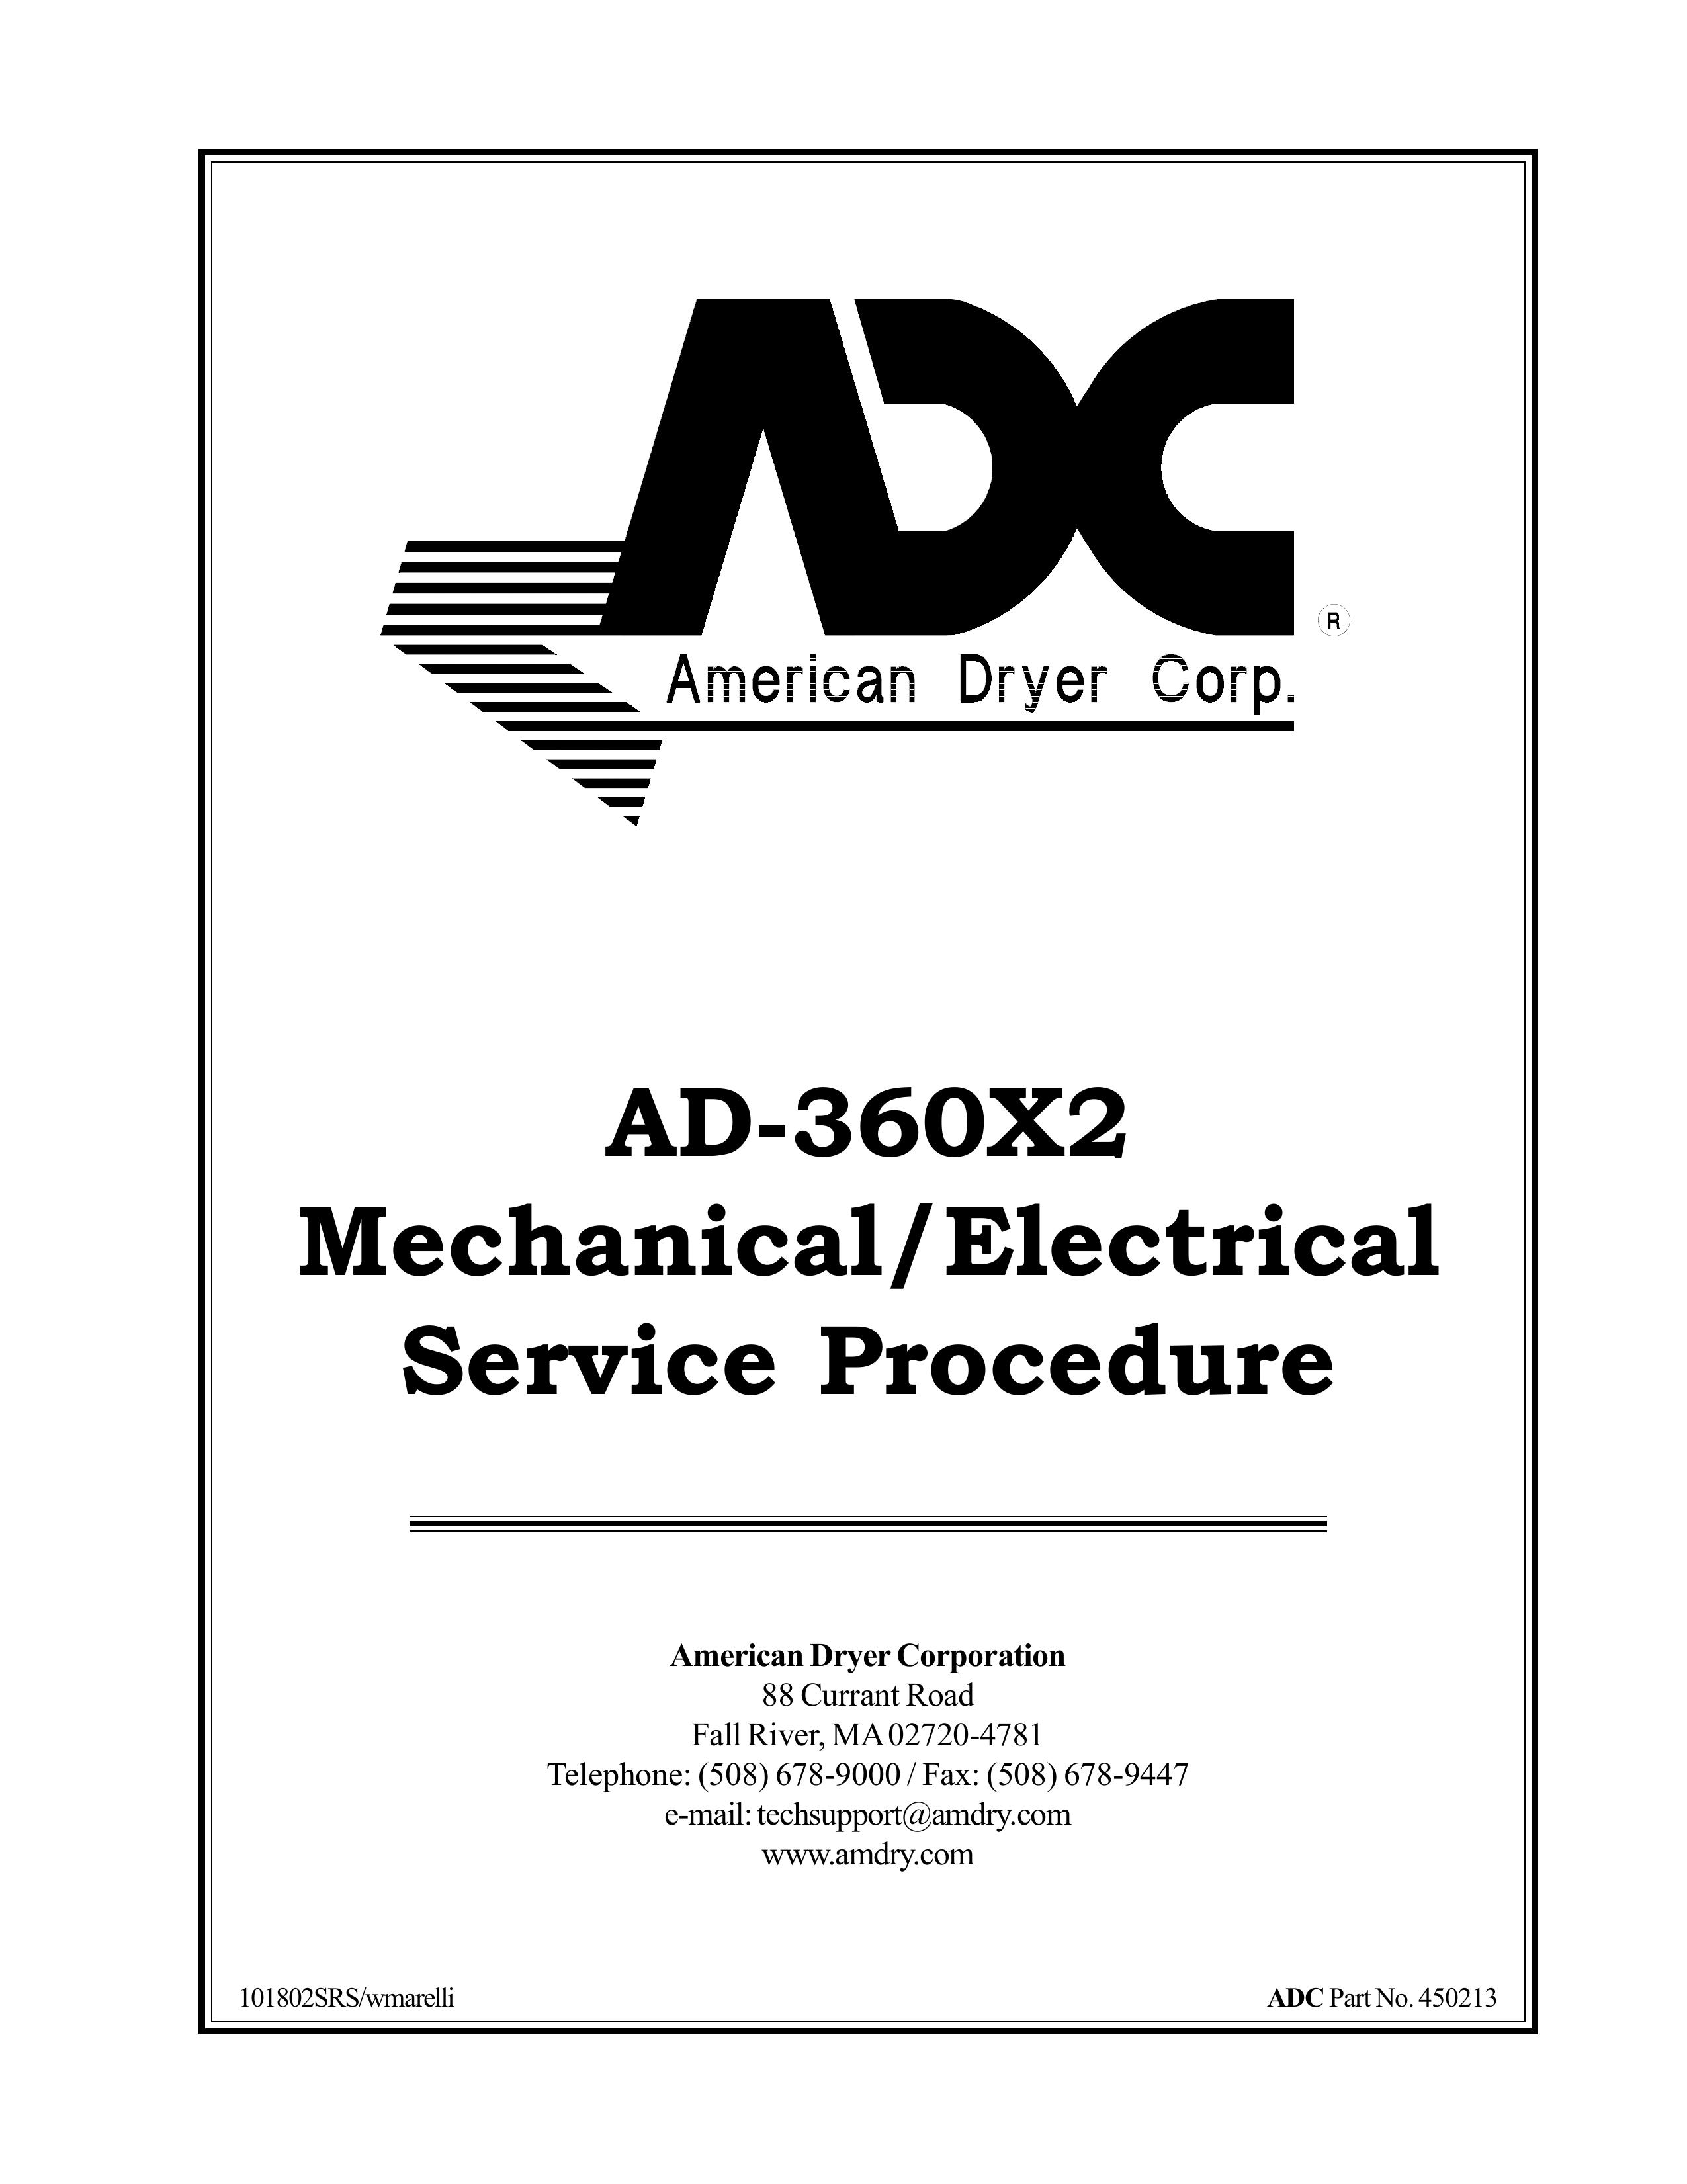 ADC AD-360X2 Clothes Dryer User Manual